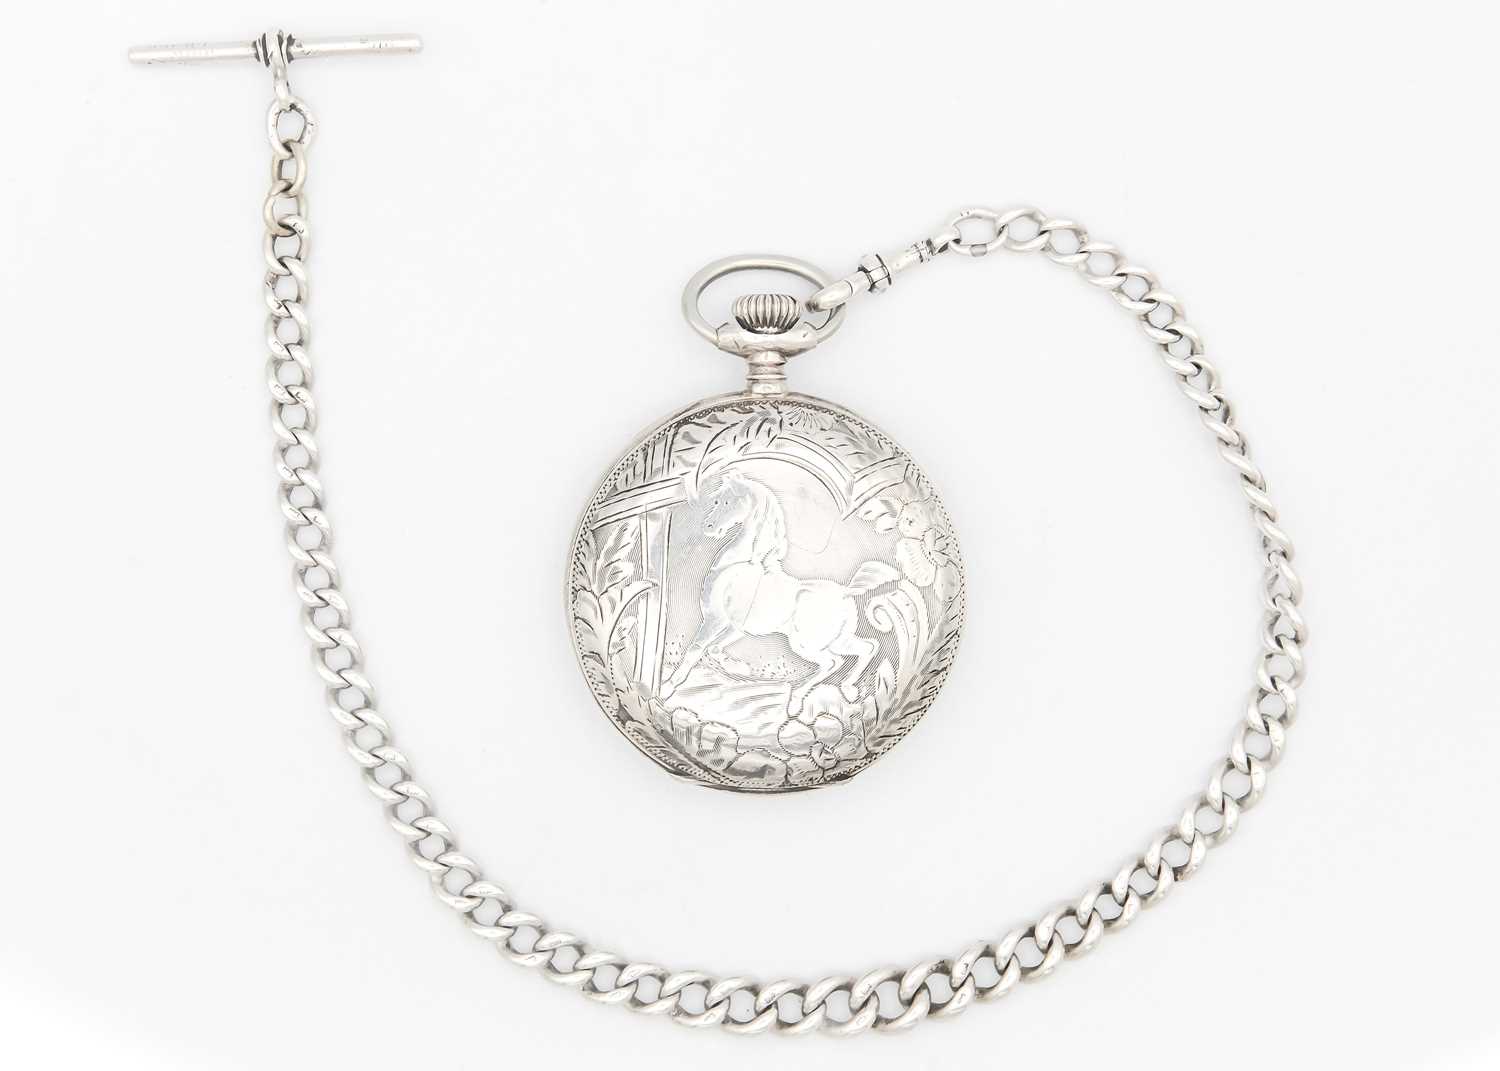 A silver-cased full hunter crown wind Swiss lever pocket watch. - Image 5 of 6